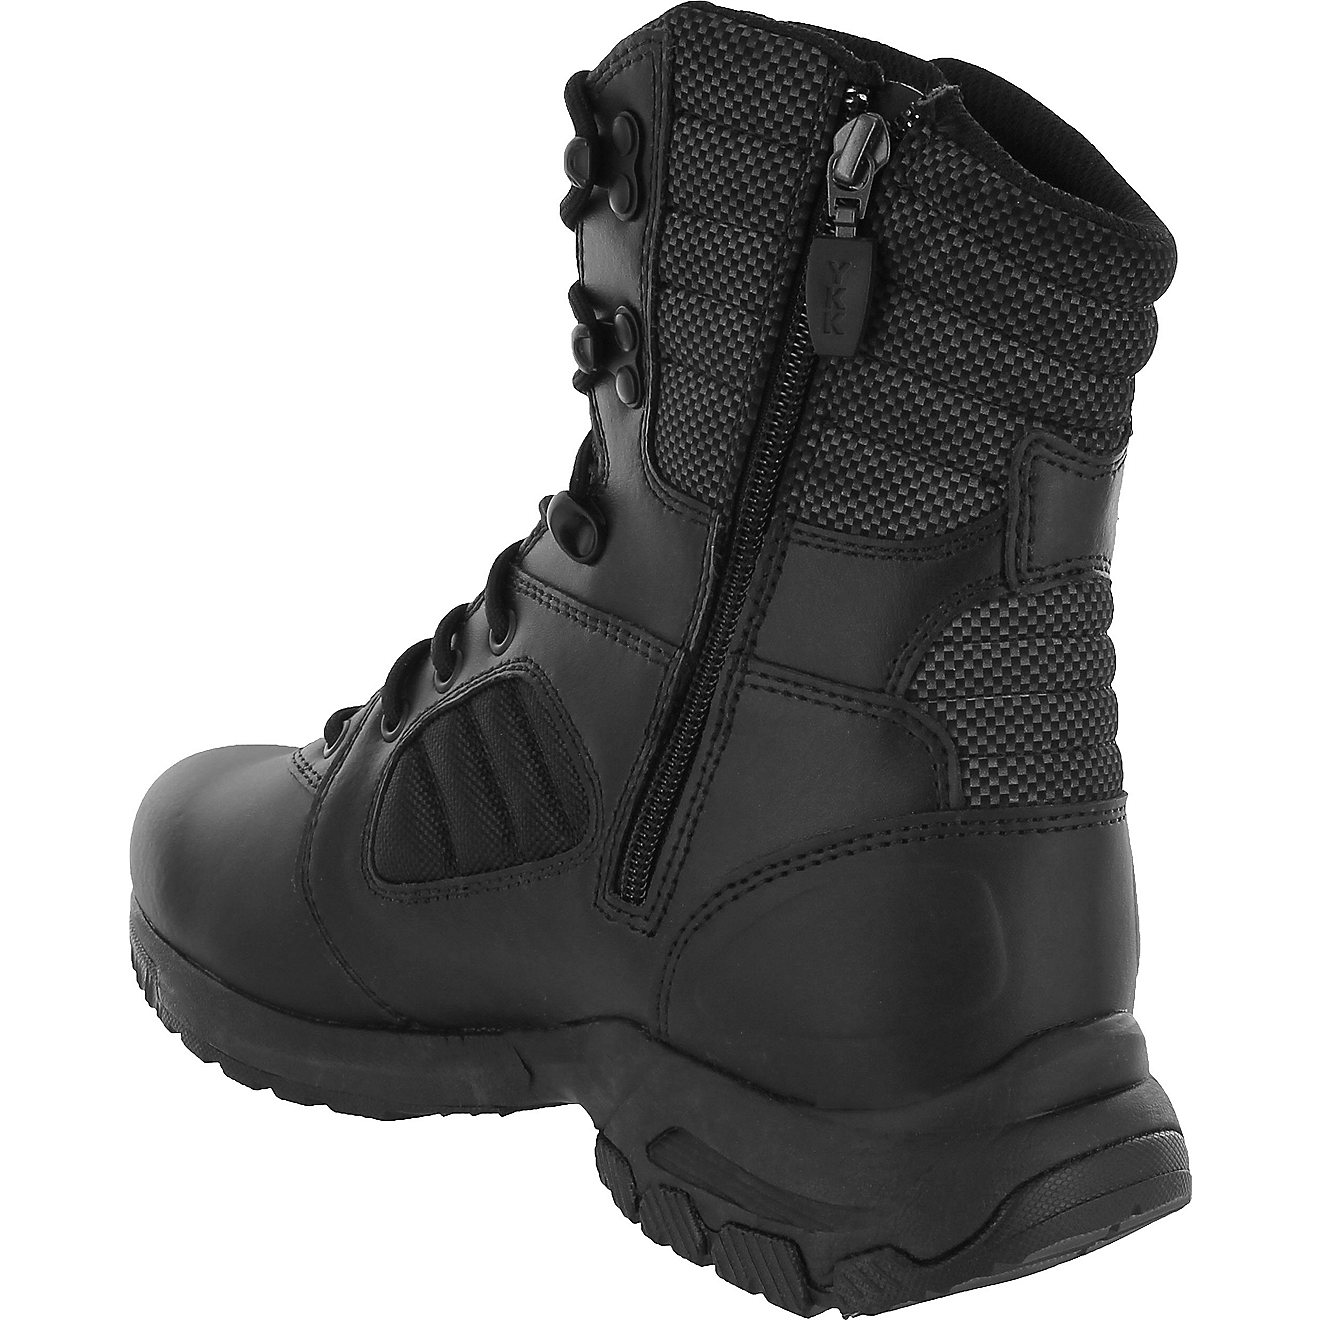 NEW Magnum 5611 Response III 8.0 Side Zip Coyote Tactical Military Police Boots 